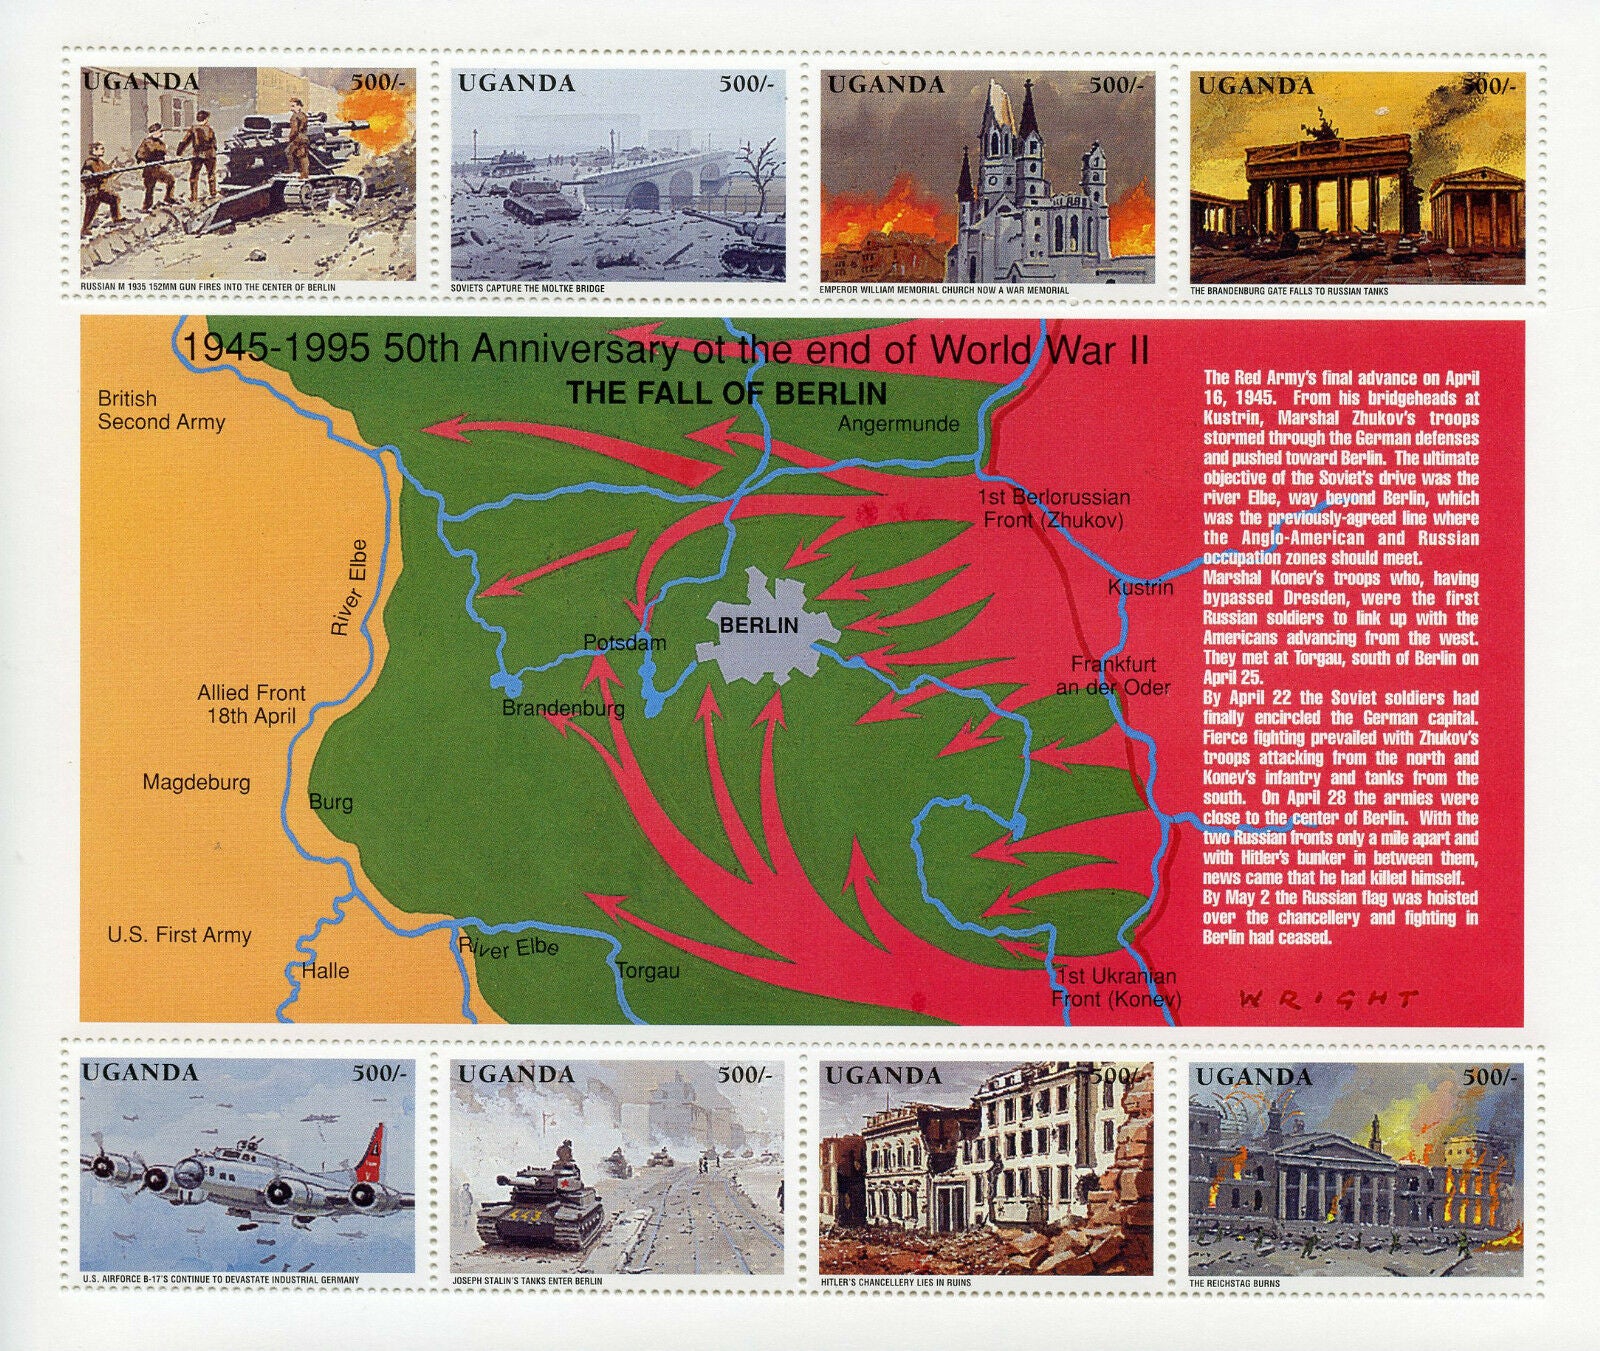 Uganda Stamps 1995 MNH WWII VE Day 50th End of World War II Fall of Berlin 8v MS